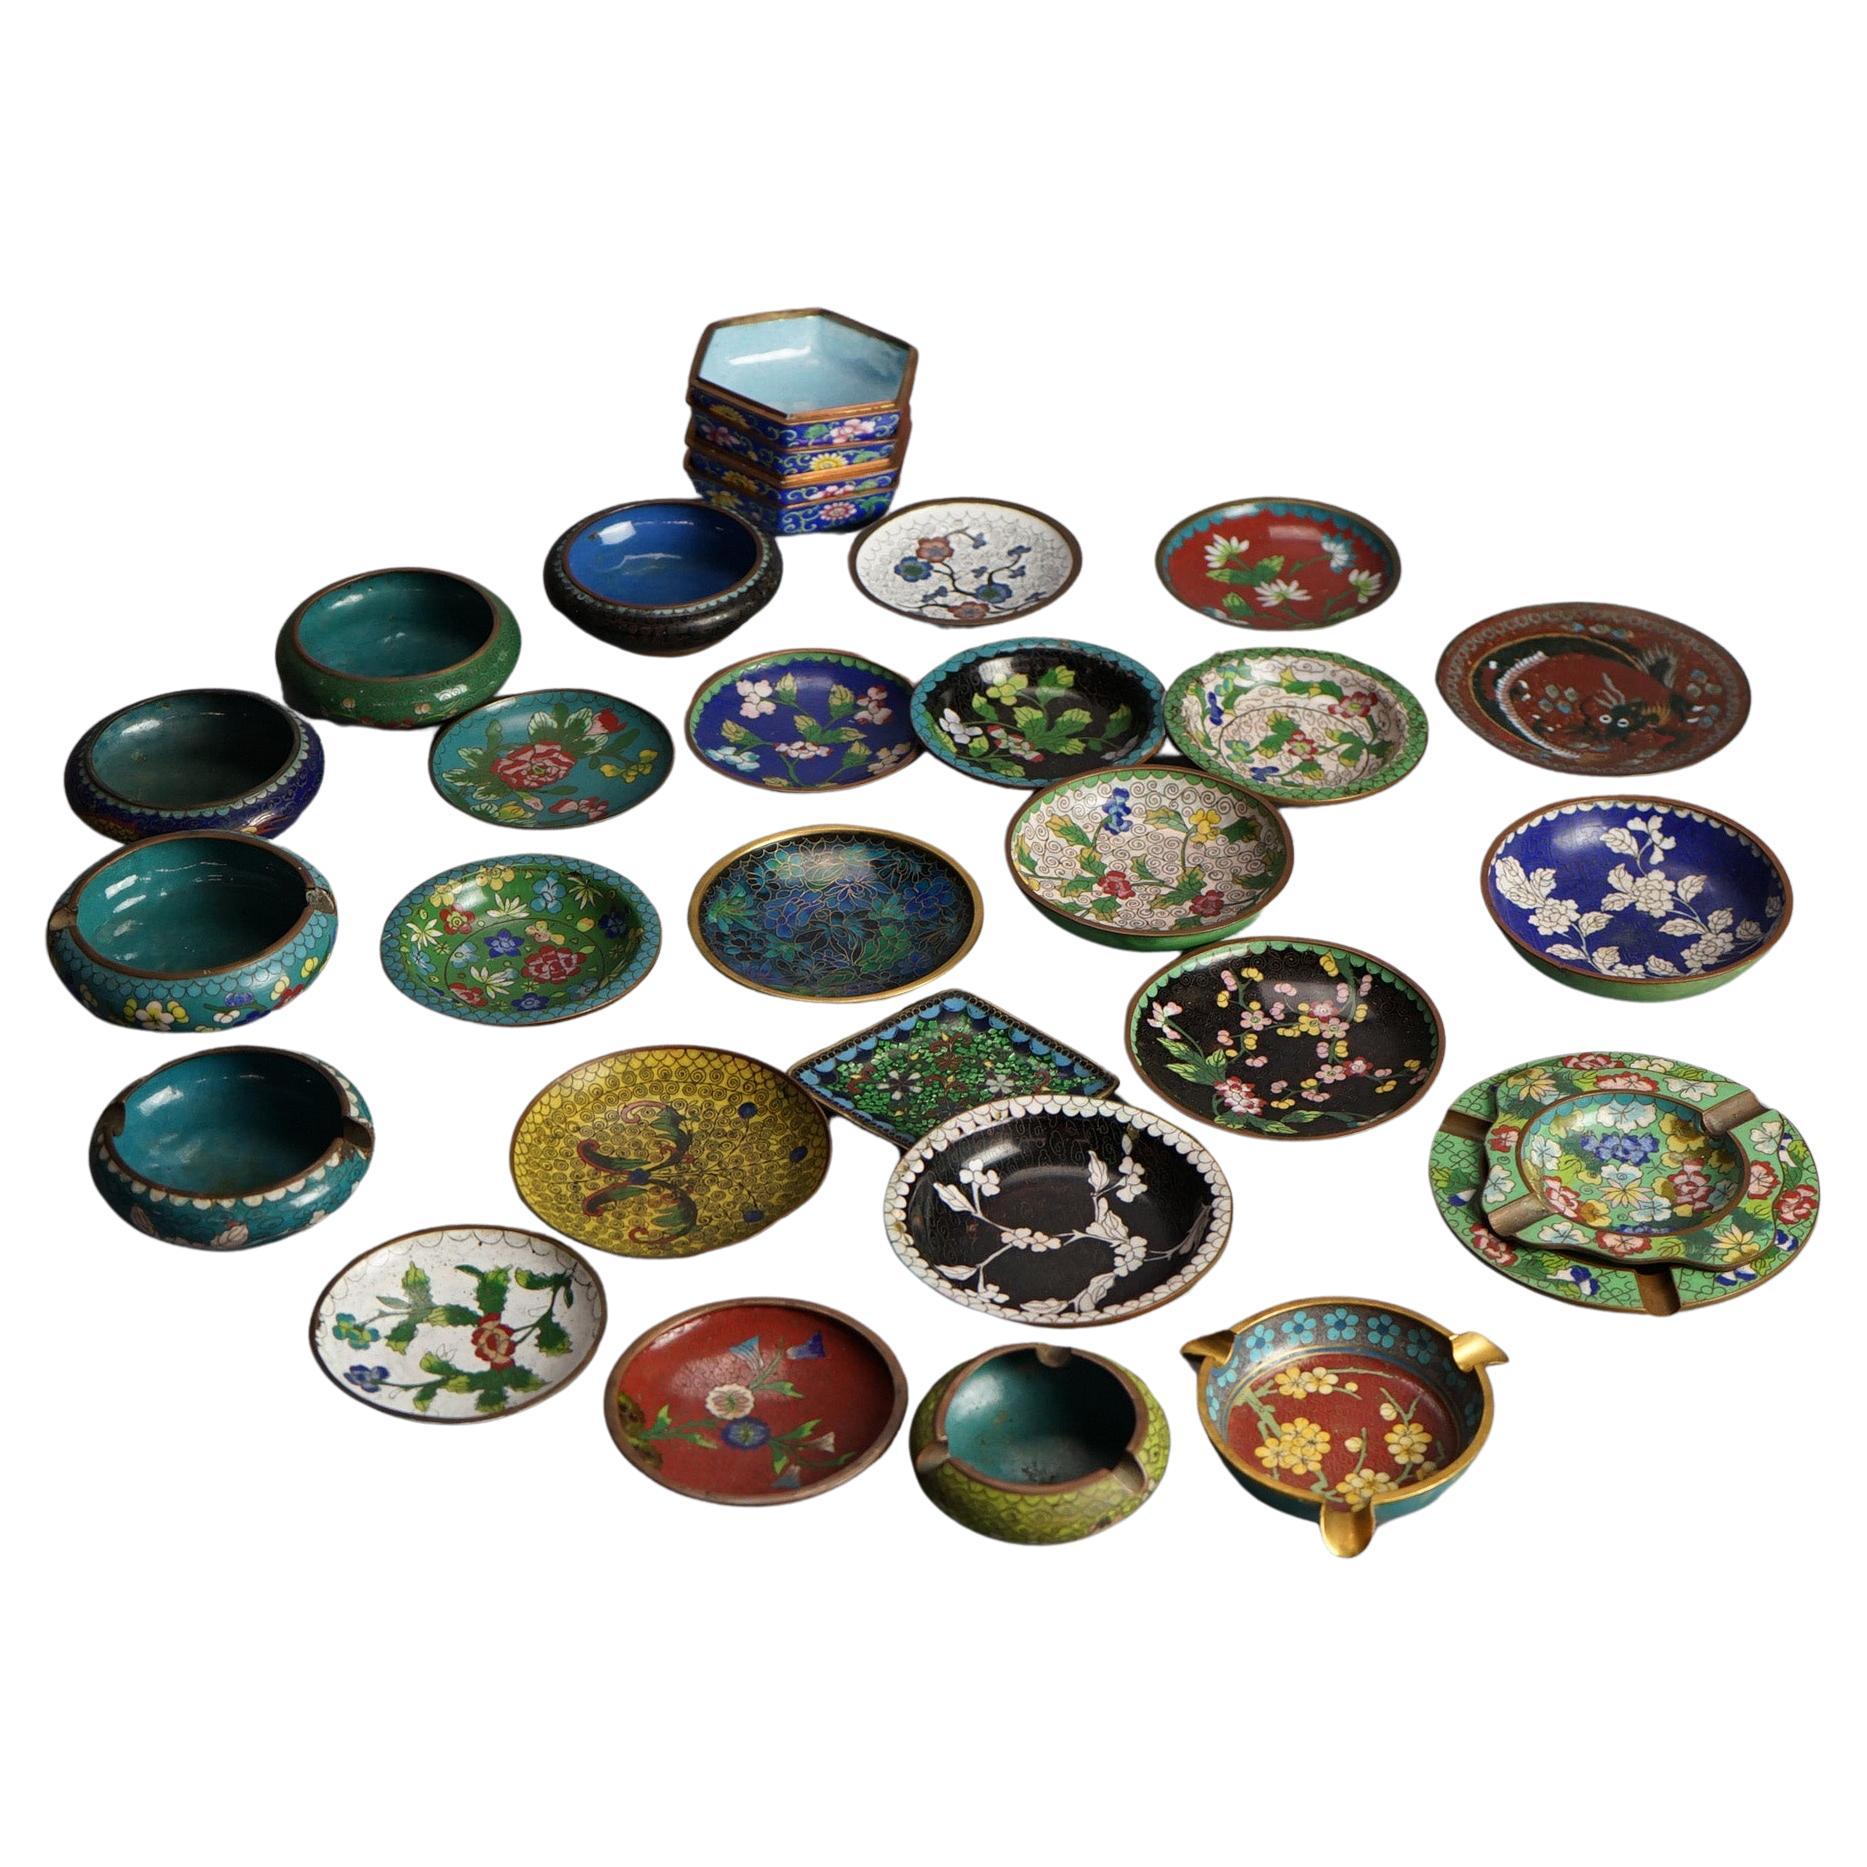 28 Antique Chinese Cloisonne Enameled Saucers & Ashtrays C1920 For Sale